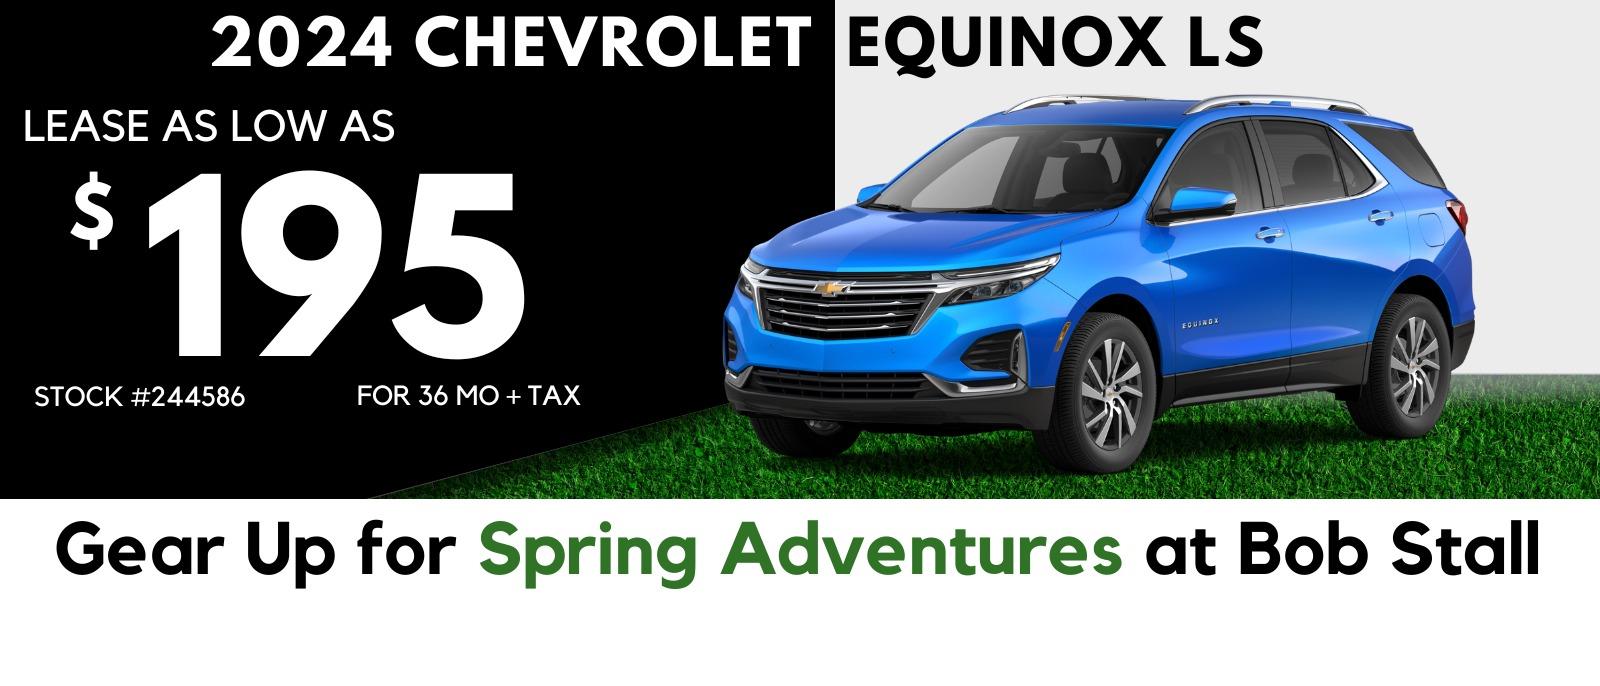 2024 Equinox Savings - Lease as low as $379 per month for 36 Months